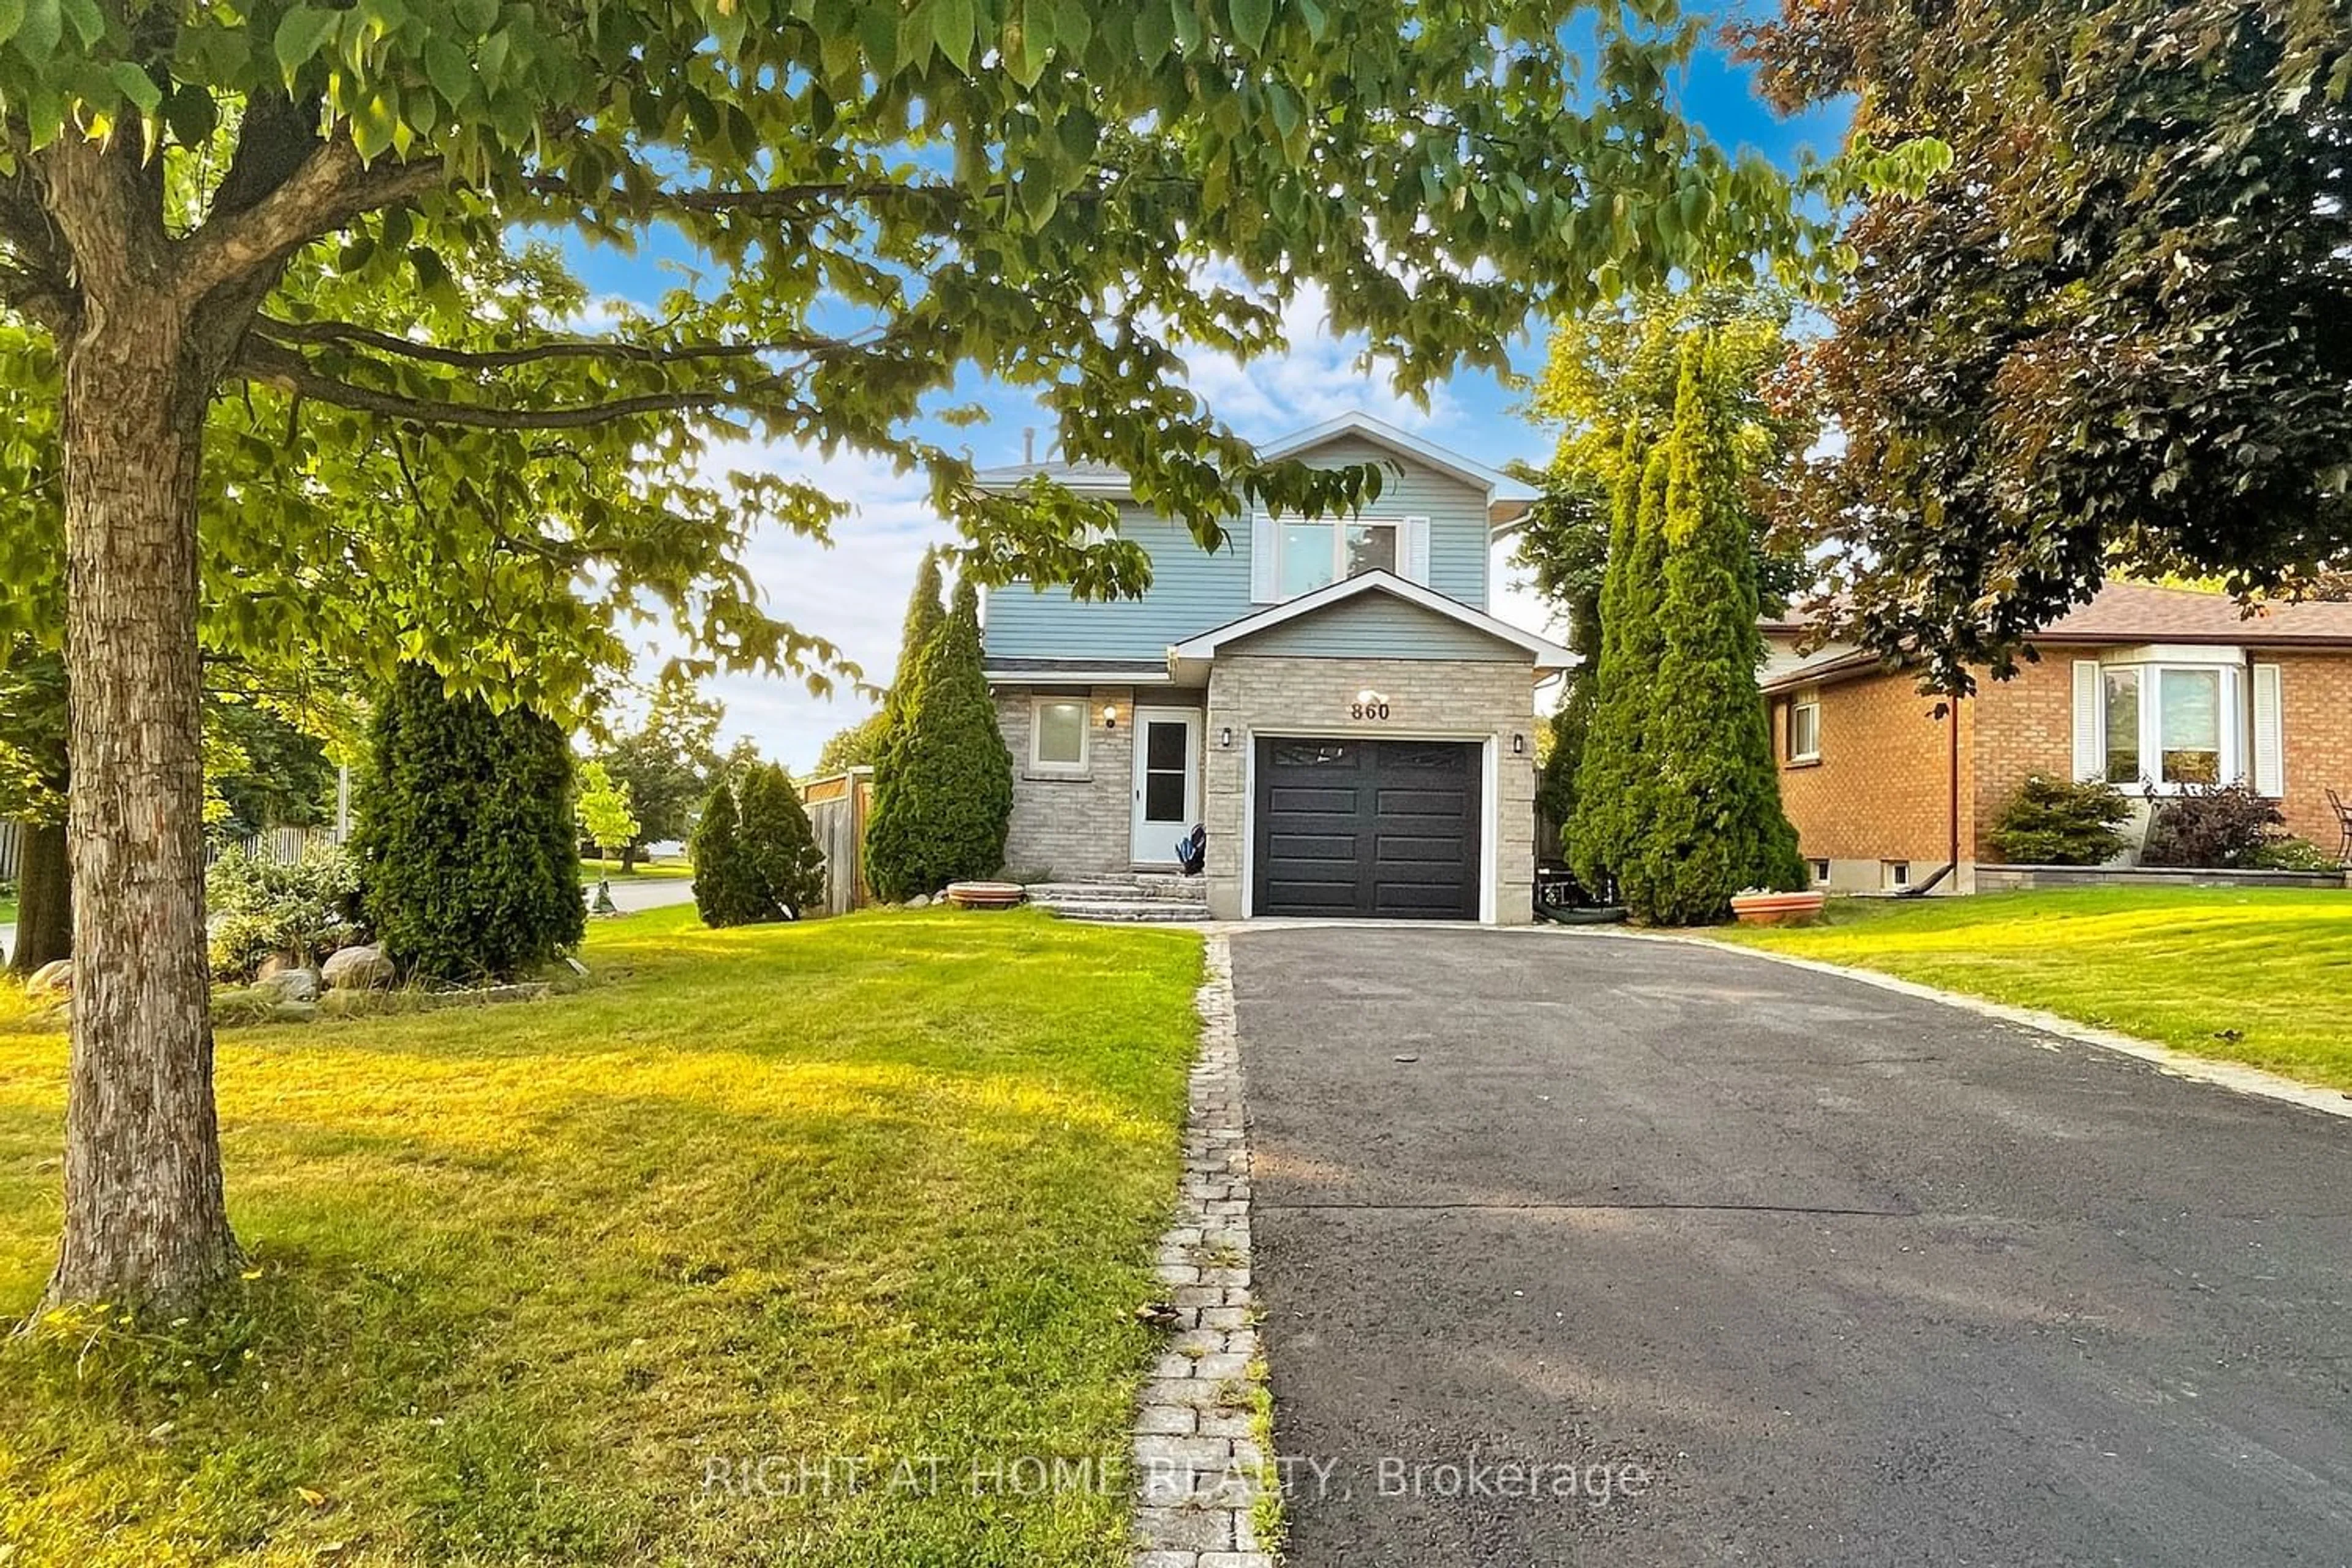 Outside view for 860 Cartref Ave, Oshawa Ontario L1J 7M6